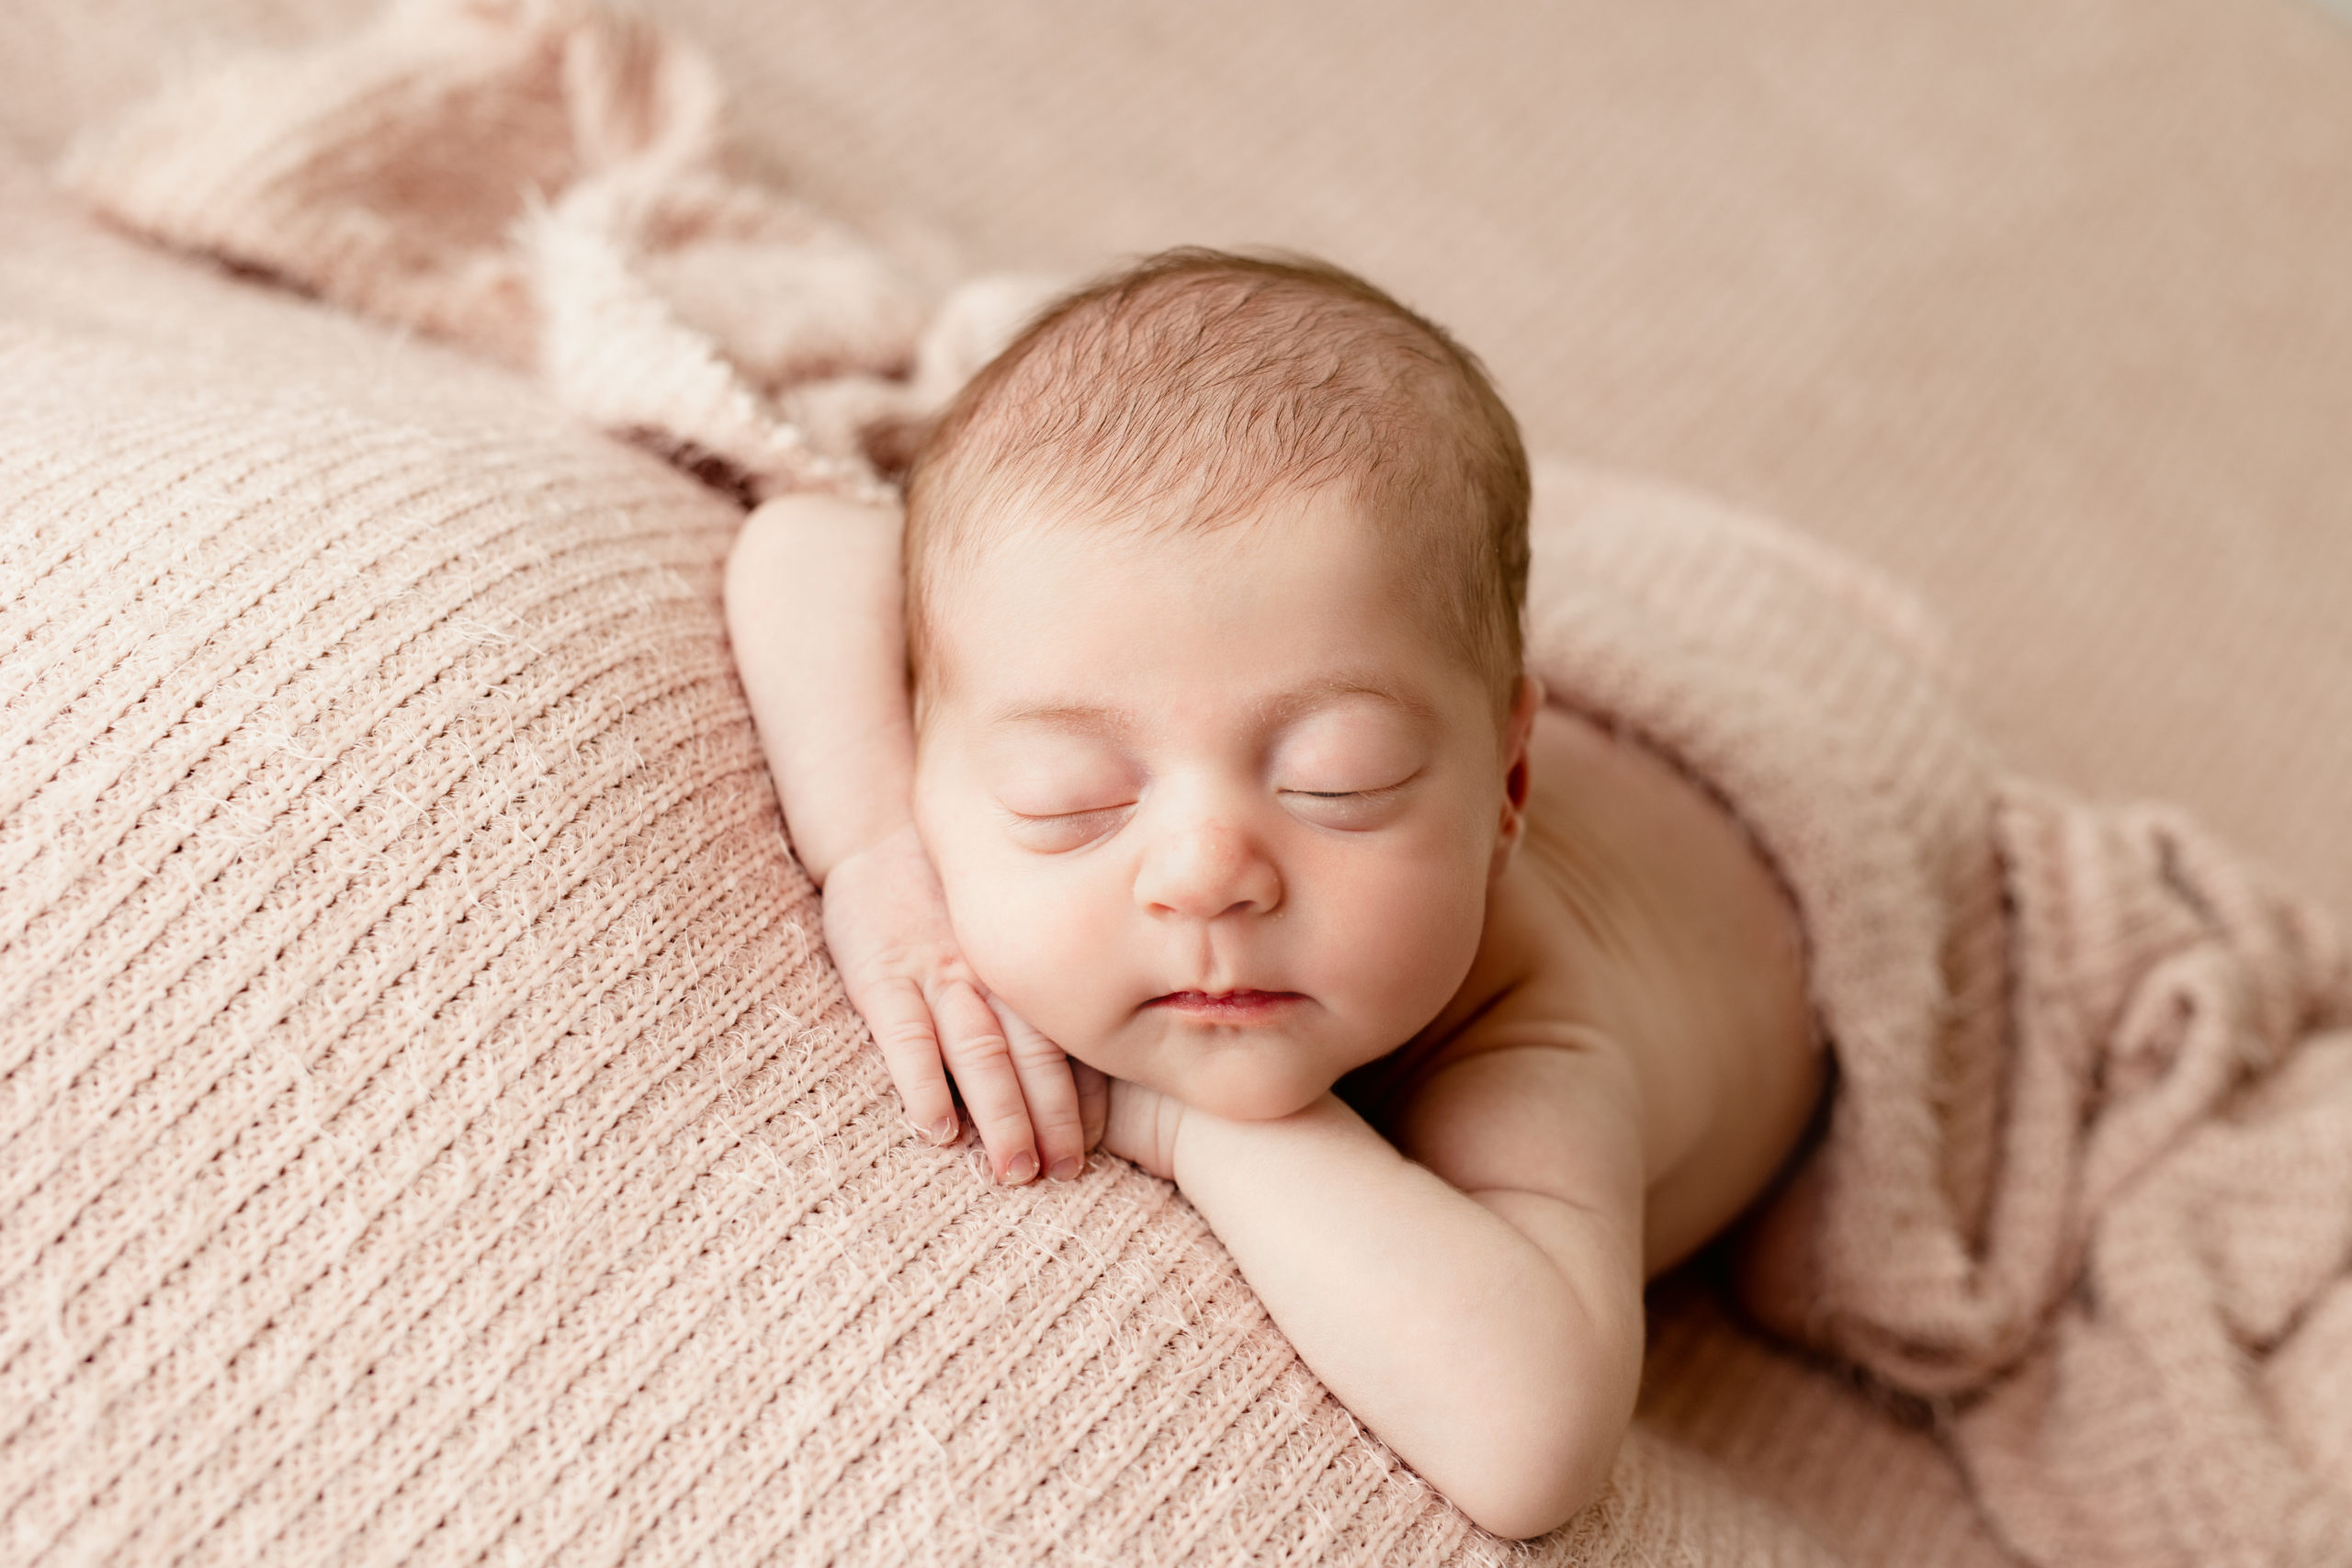 newborn baby sleeping on her arms with a pink blanket